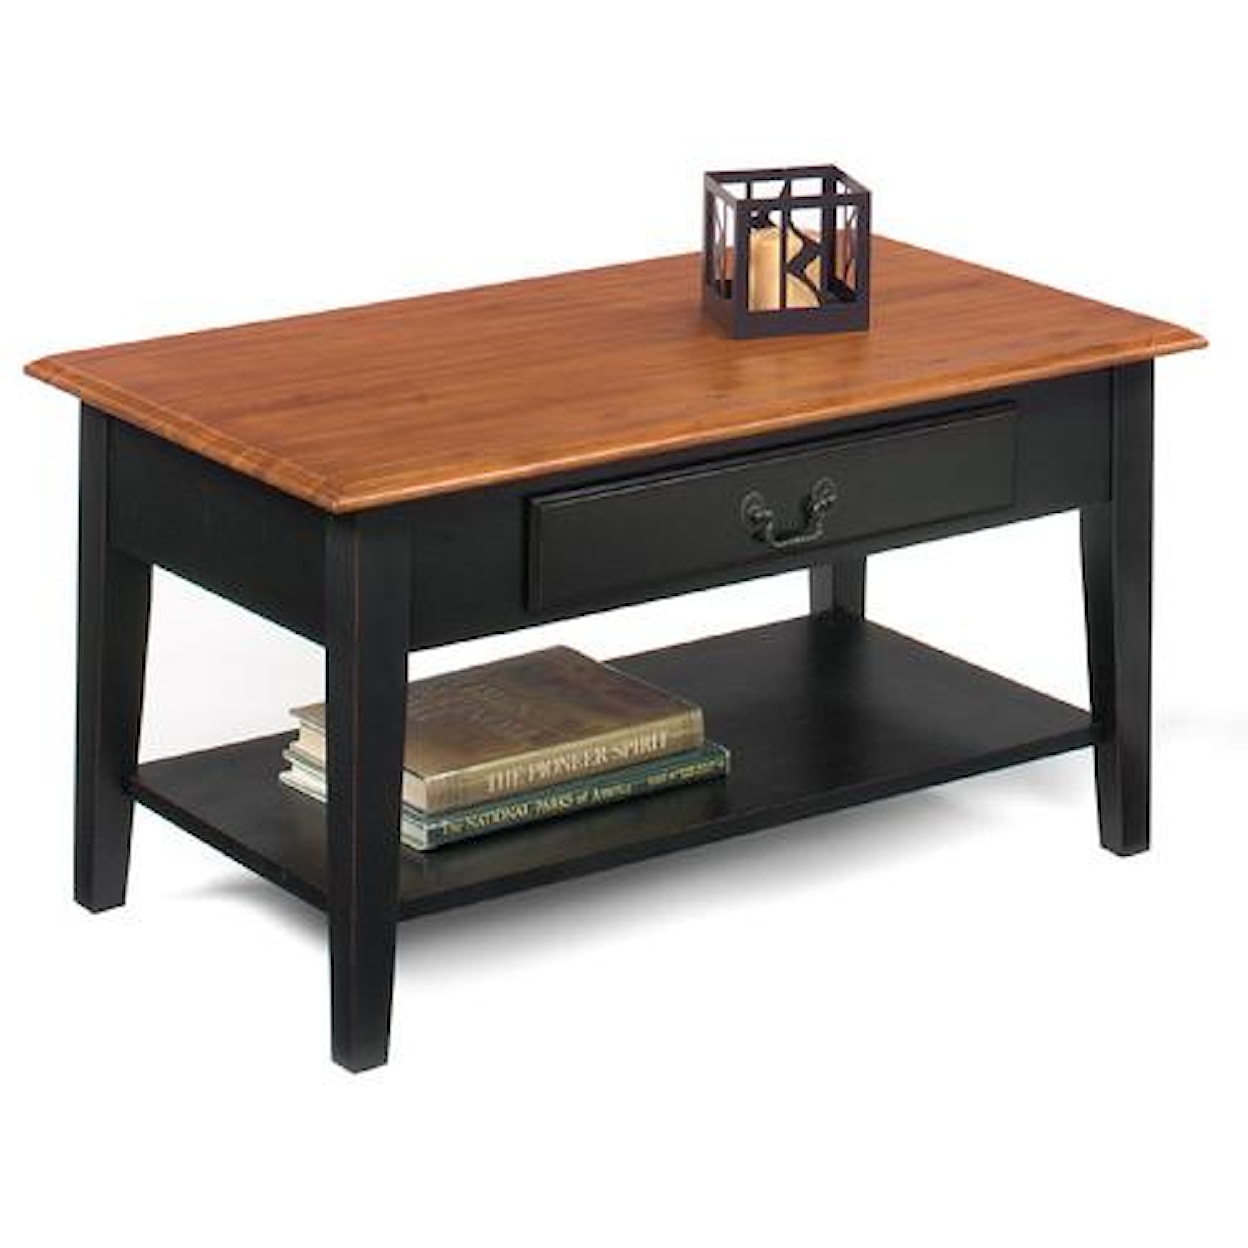 Null Furniture 1900 International Accents Rectangular Cocktail Table